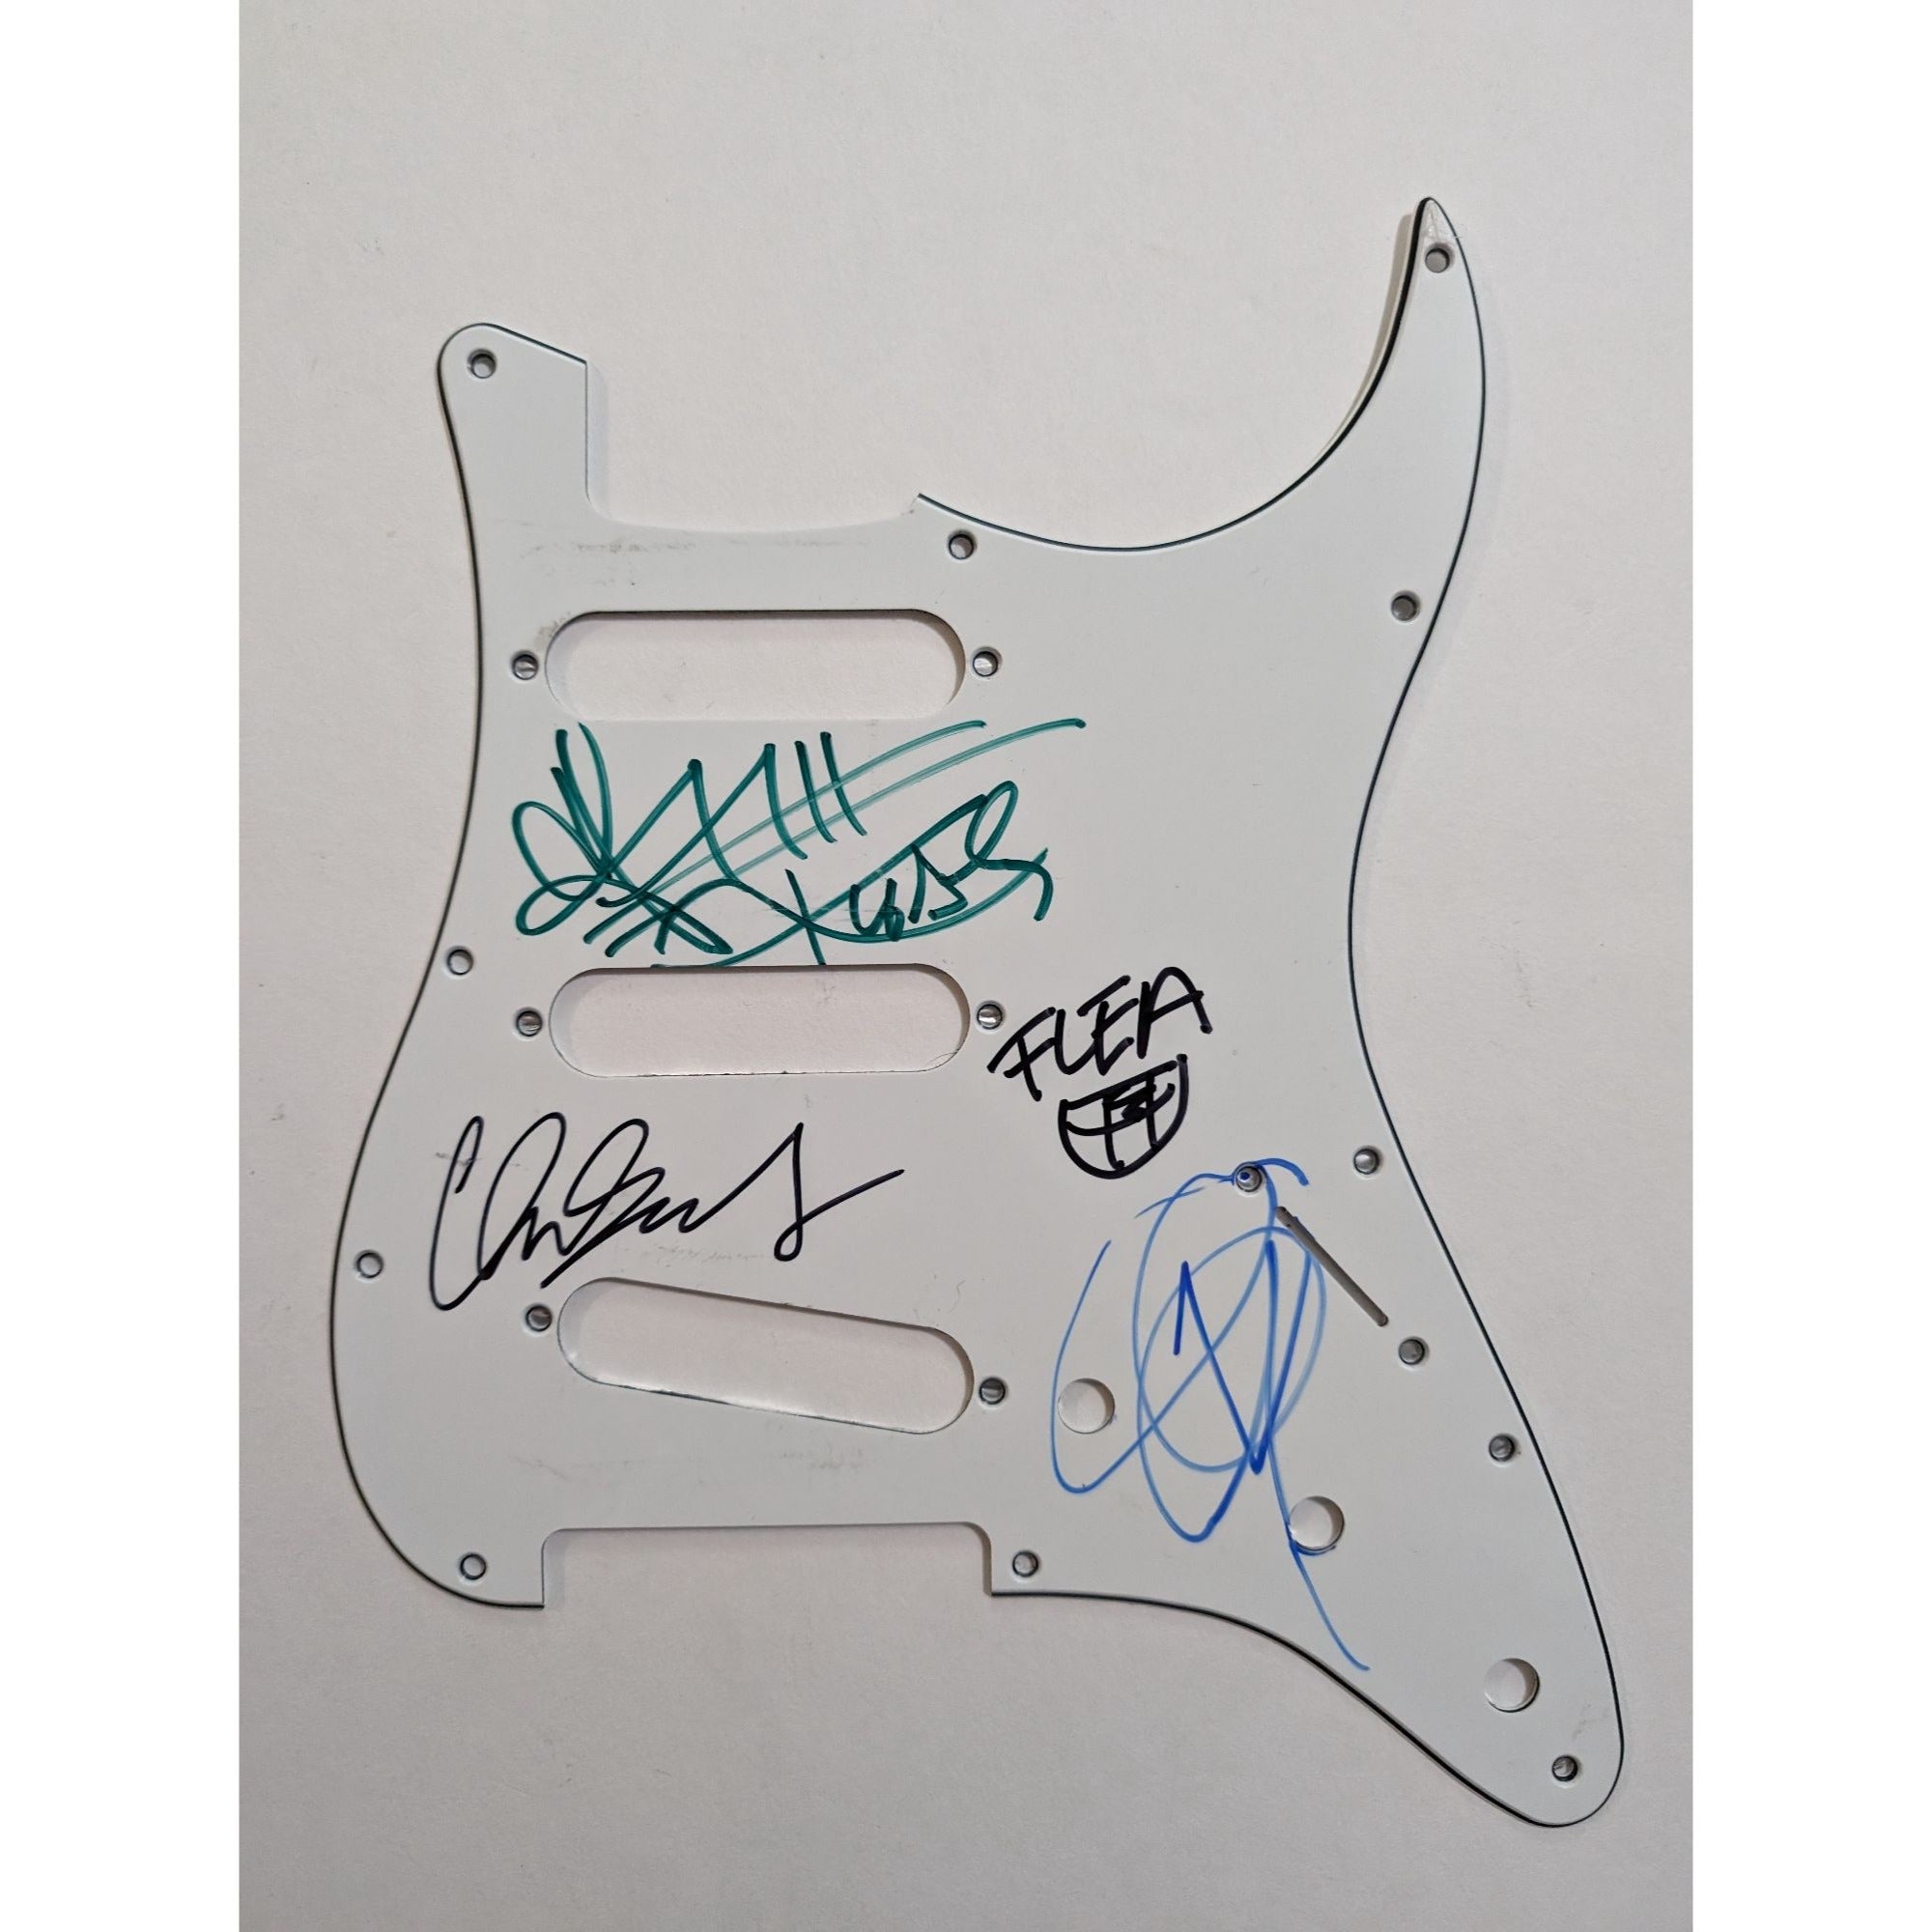 Red Hot Peppers Anthony Kiedis, Flea, Chad Smith, John Frusciante  Fender Stratocaster electric guitar pick guard signed with proof